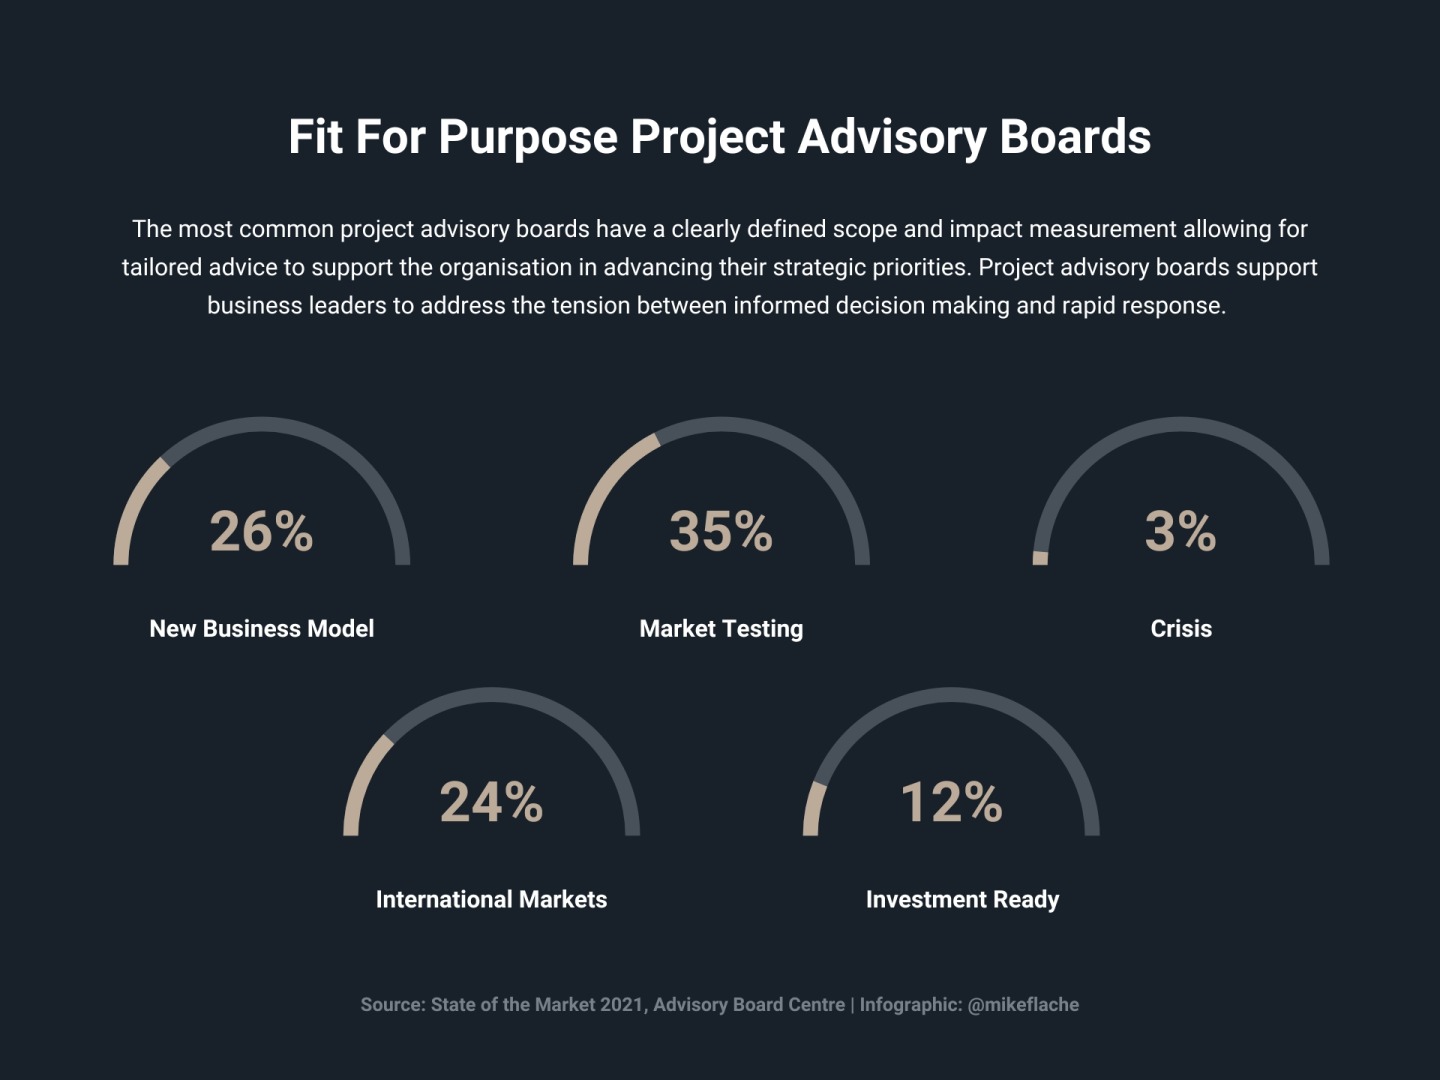 fit-for-purpose-project-advisory-boards.jpg